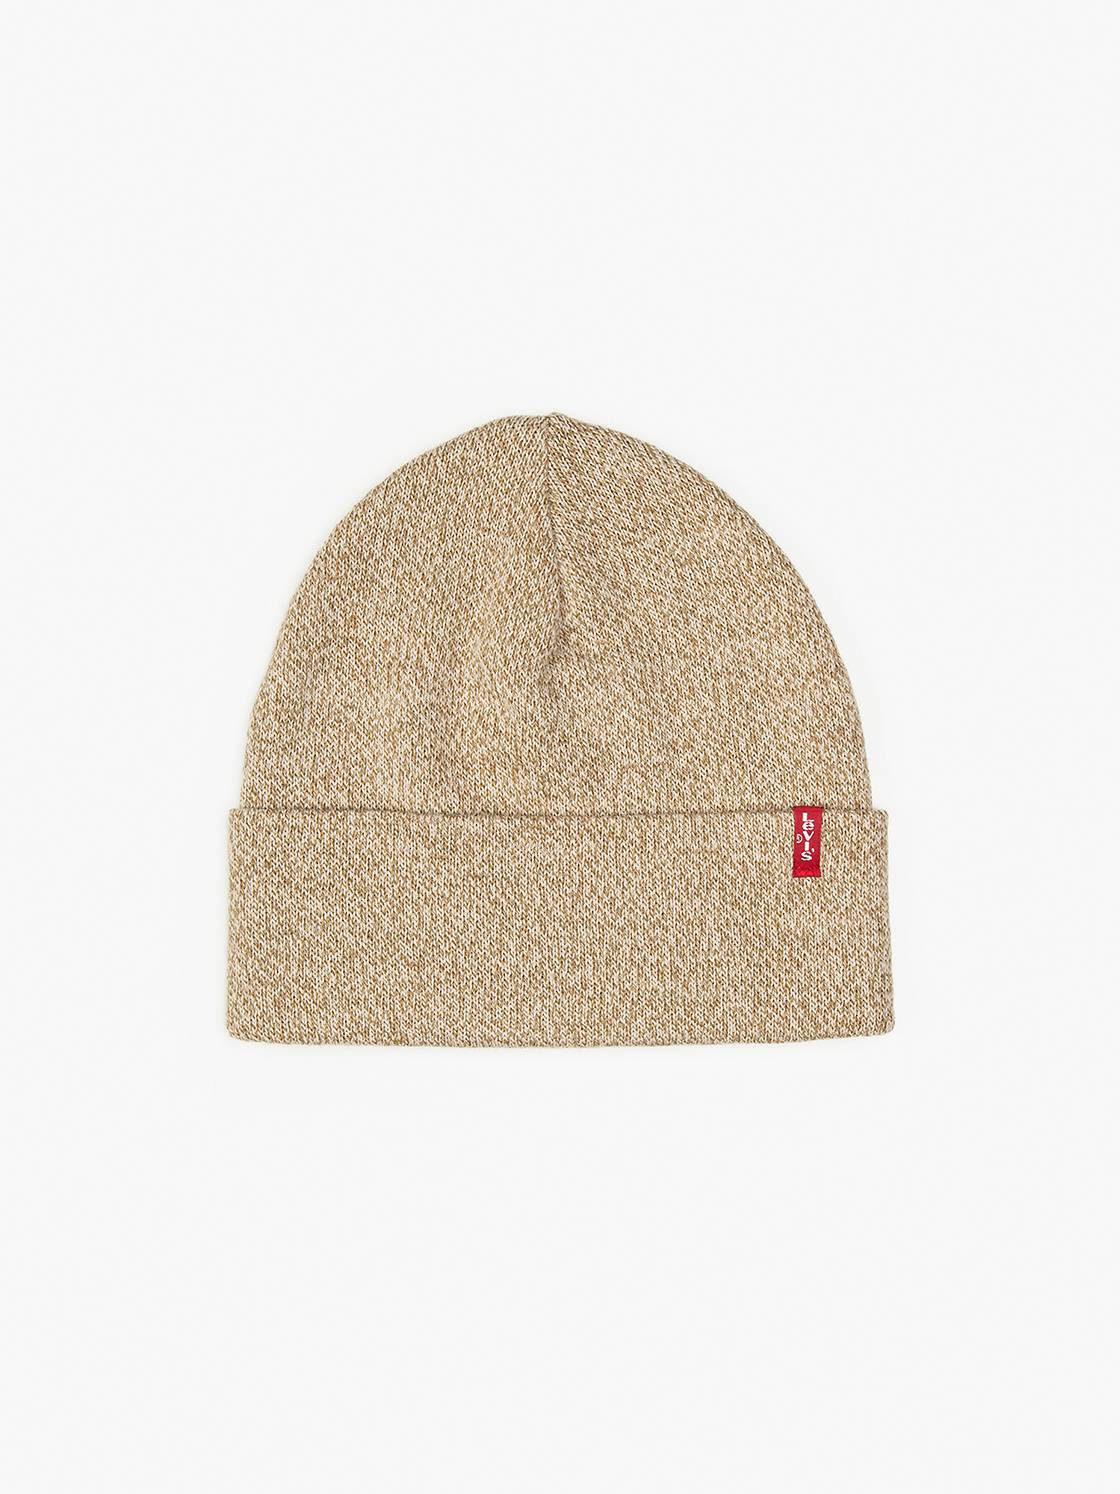 Levi's® Red Tab™ Slouchy Beanie 1